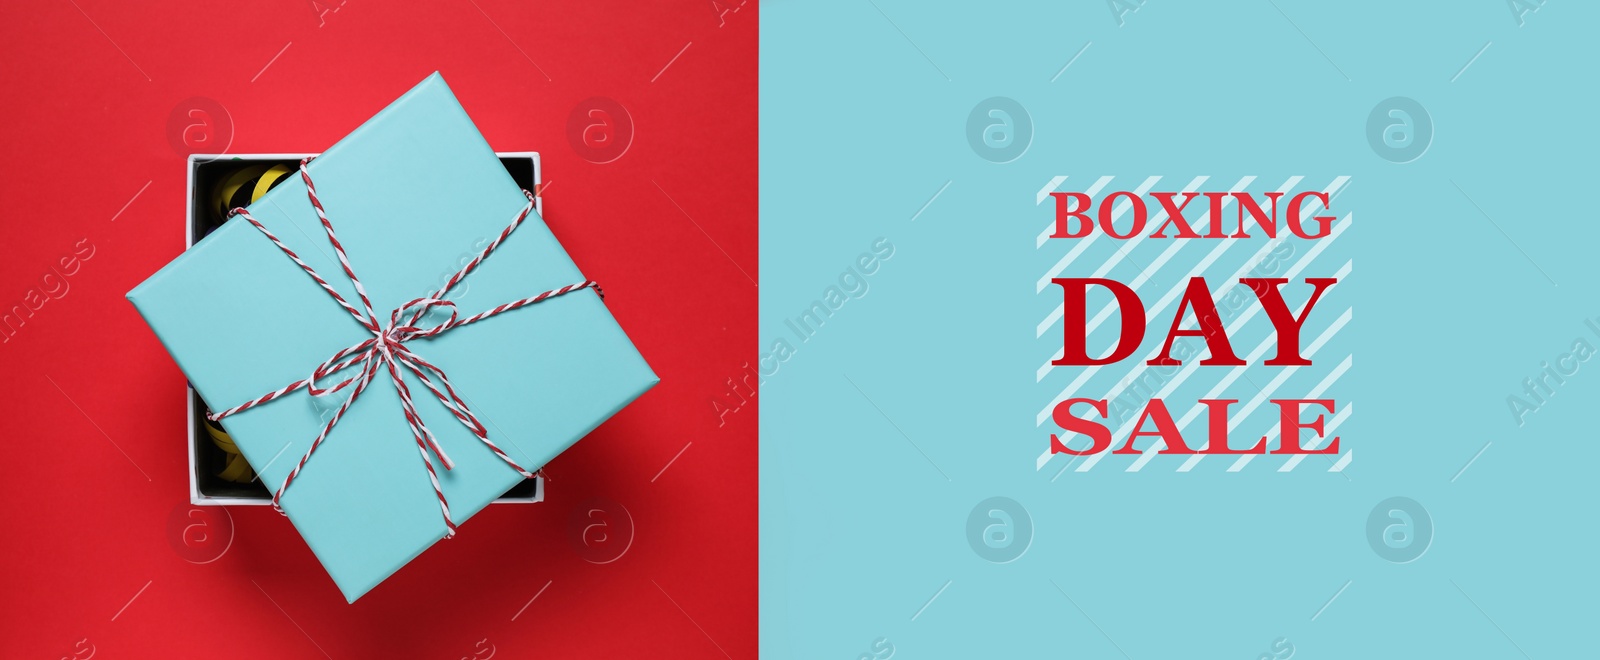 Image of Boxing day sale. Top view of gift on red background, banner design